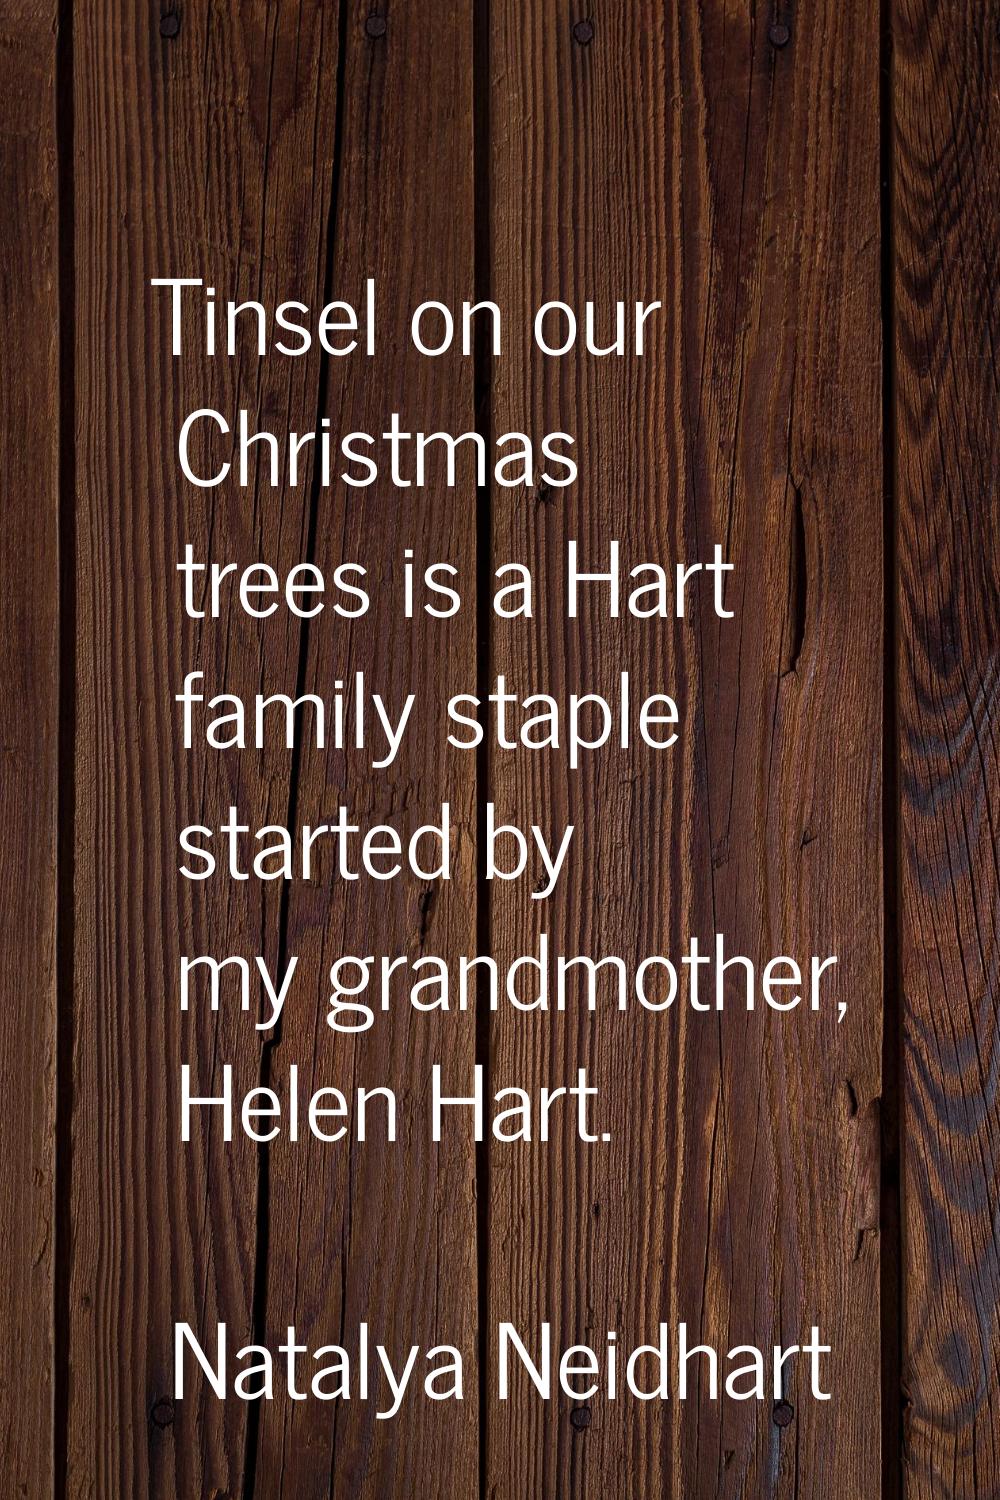 Tinsel on our Christmas trees is a Hart family staple started by my grandmother, Helen Hart.